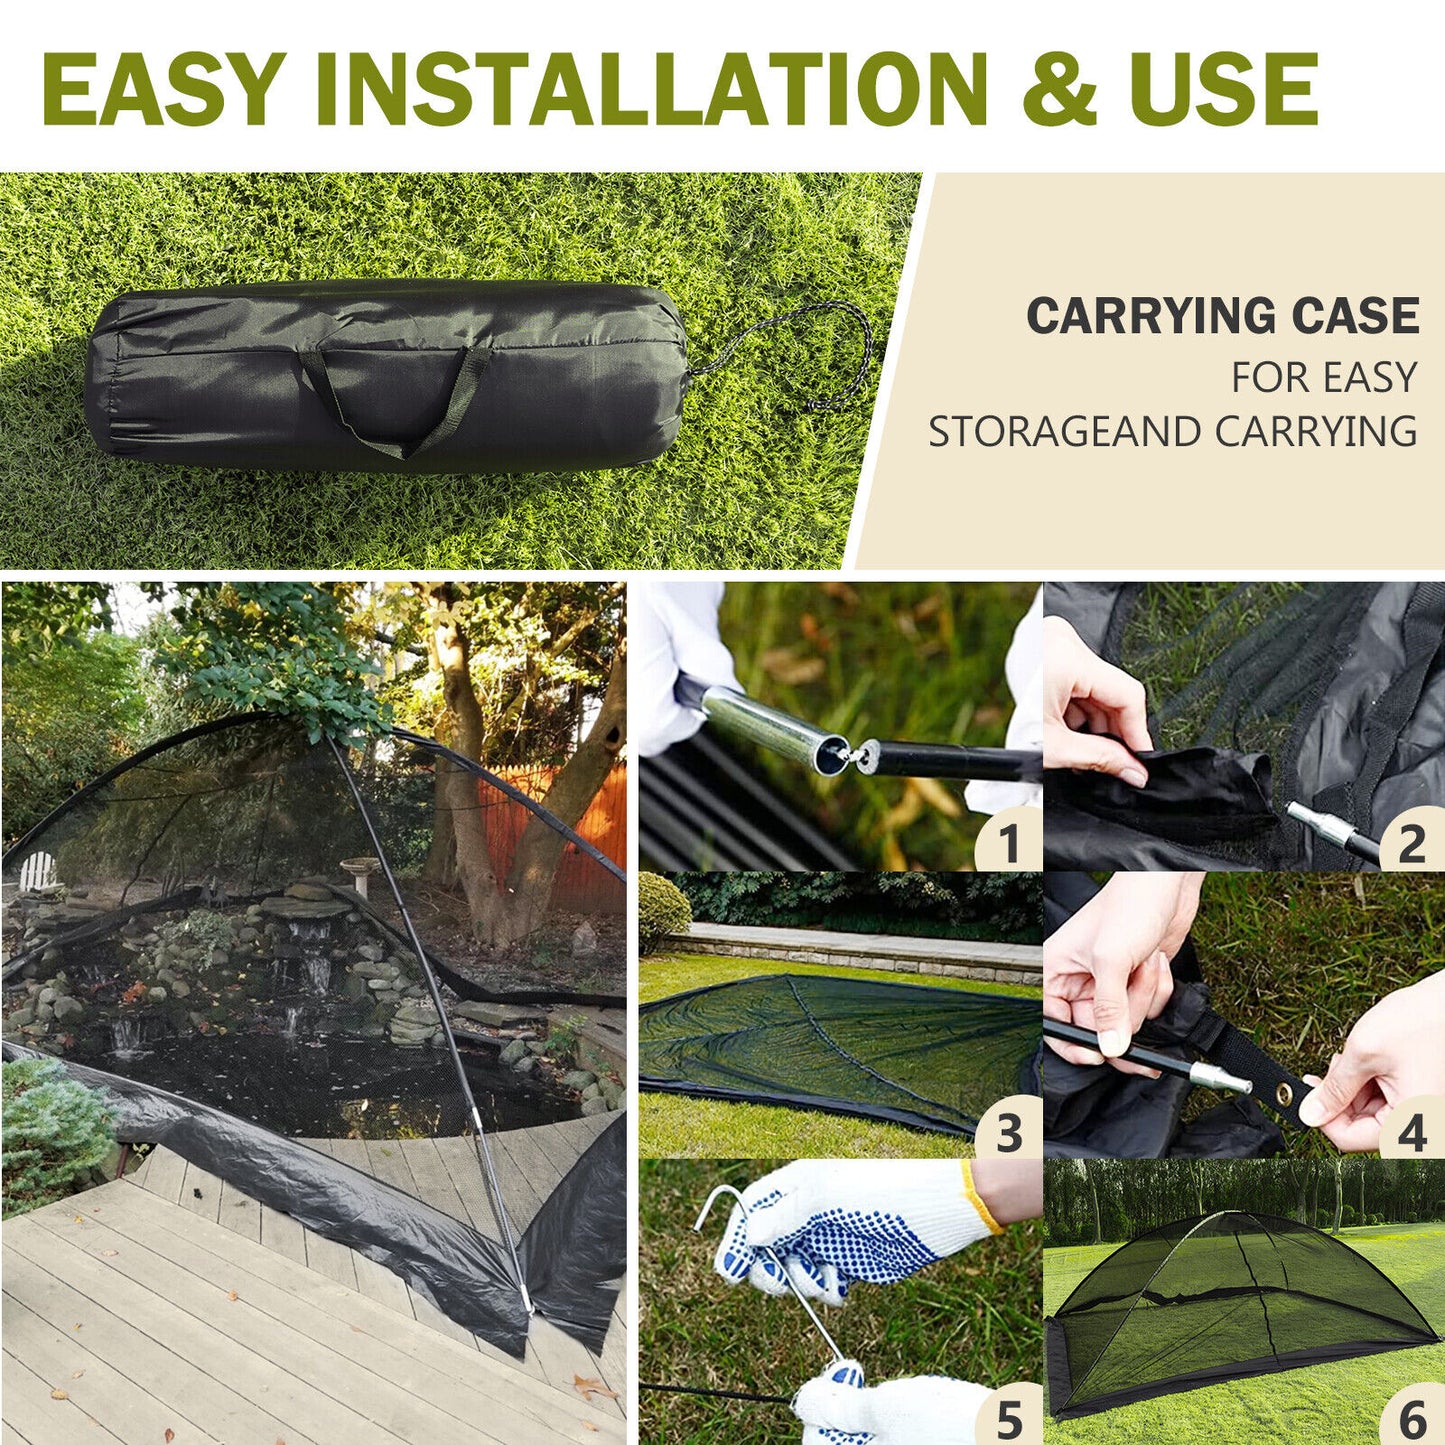 Pond Cover Dome Garden Pond Net 13x17 FT Netting Covers for Leaves w/ Bag Black